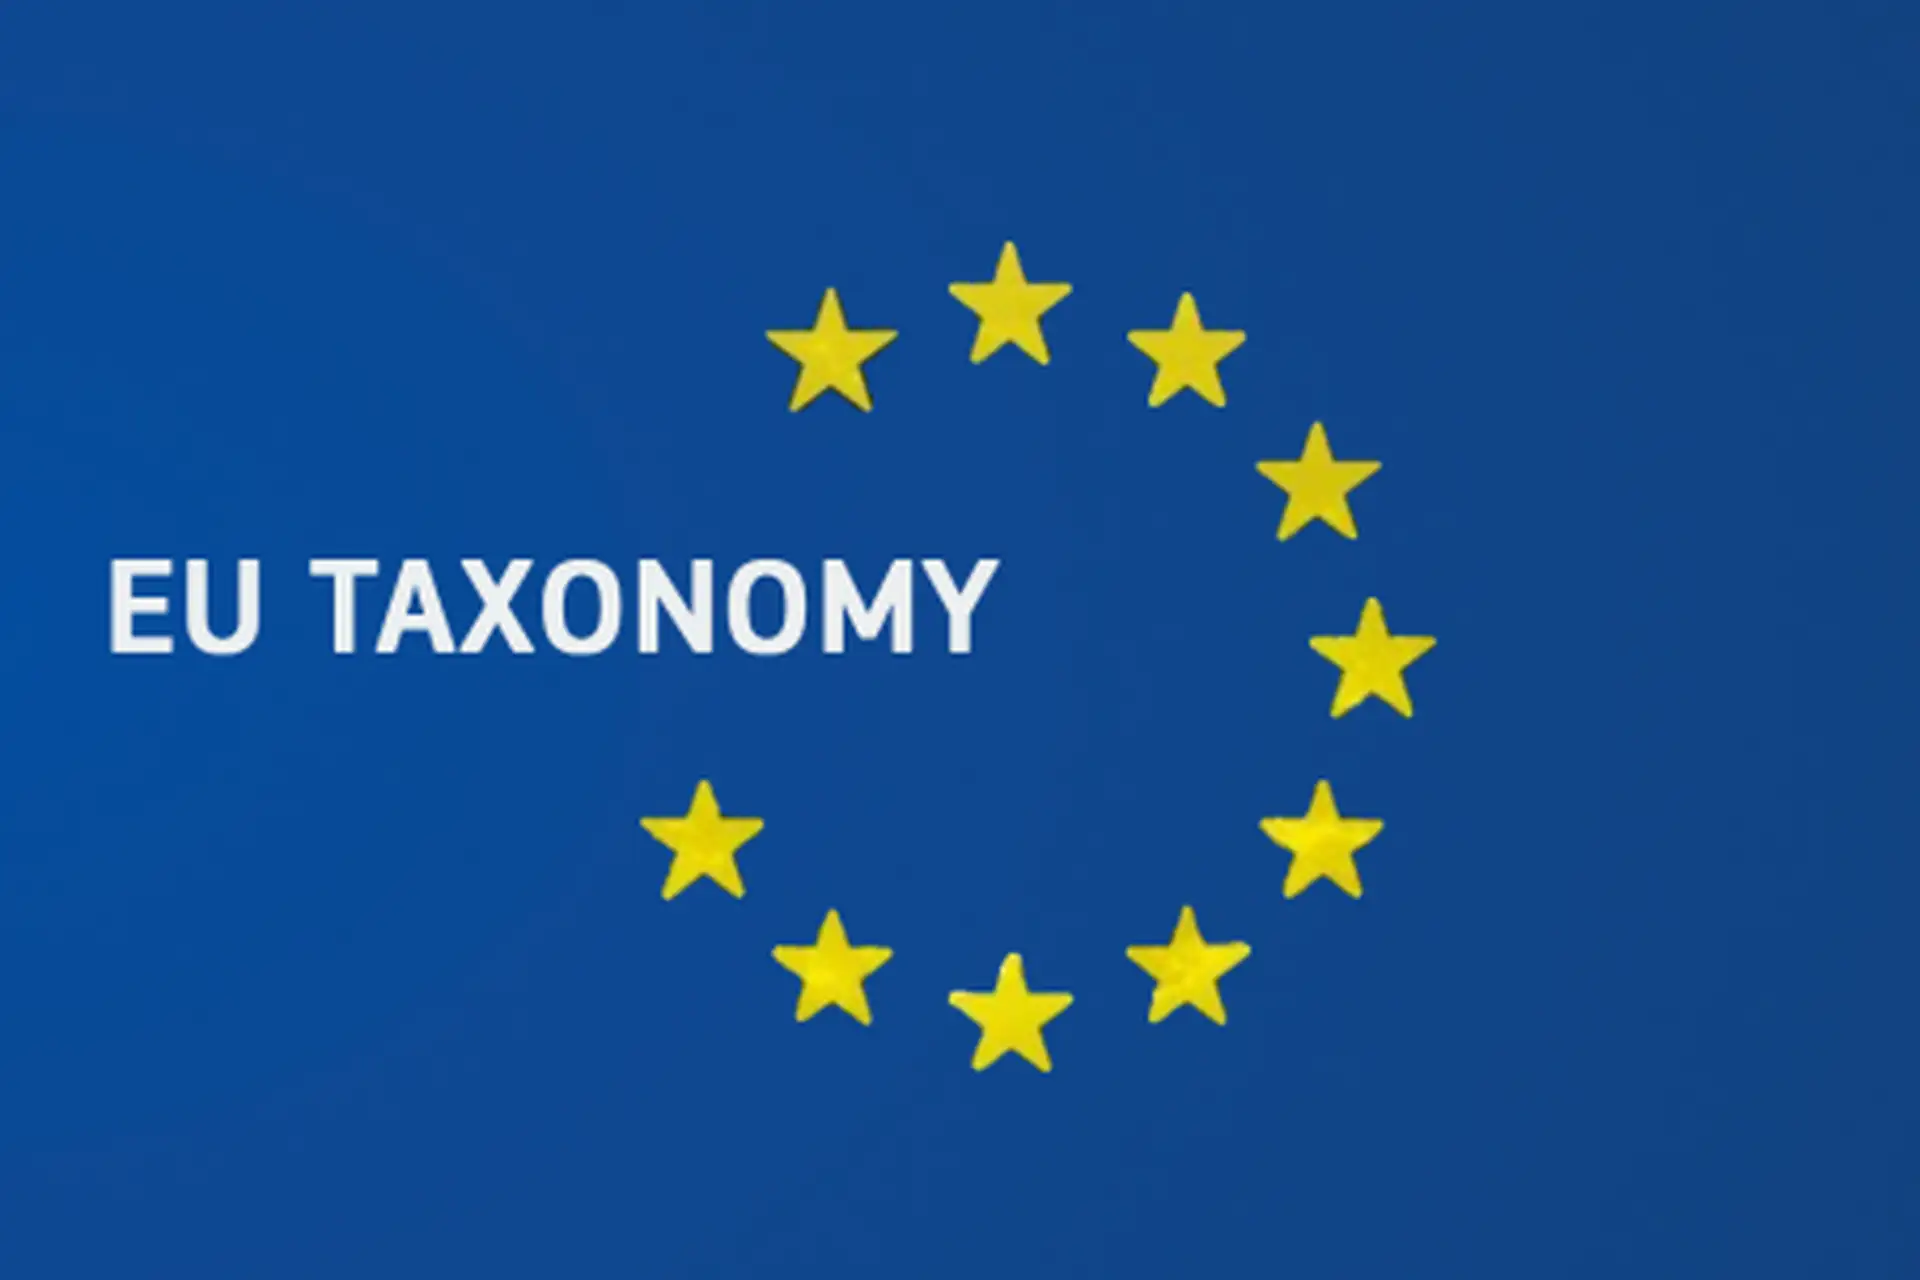 What is the EU taxonomy?